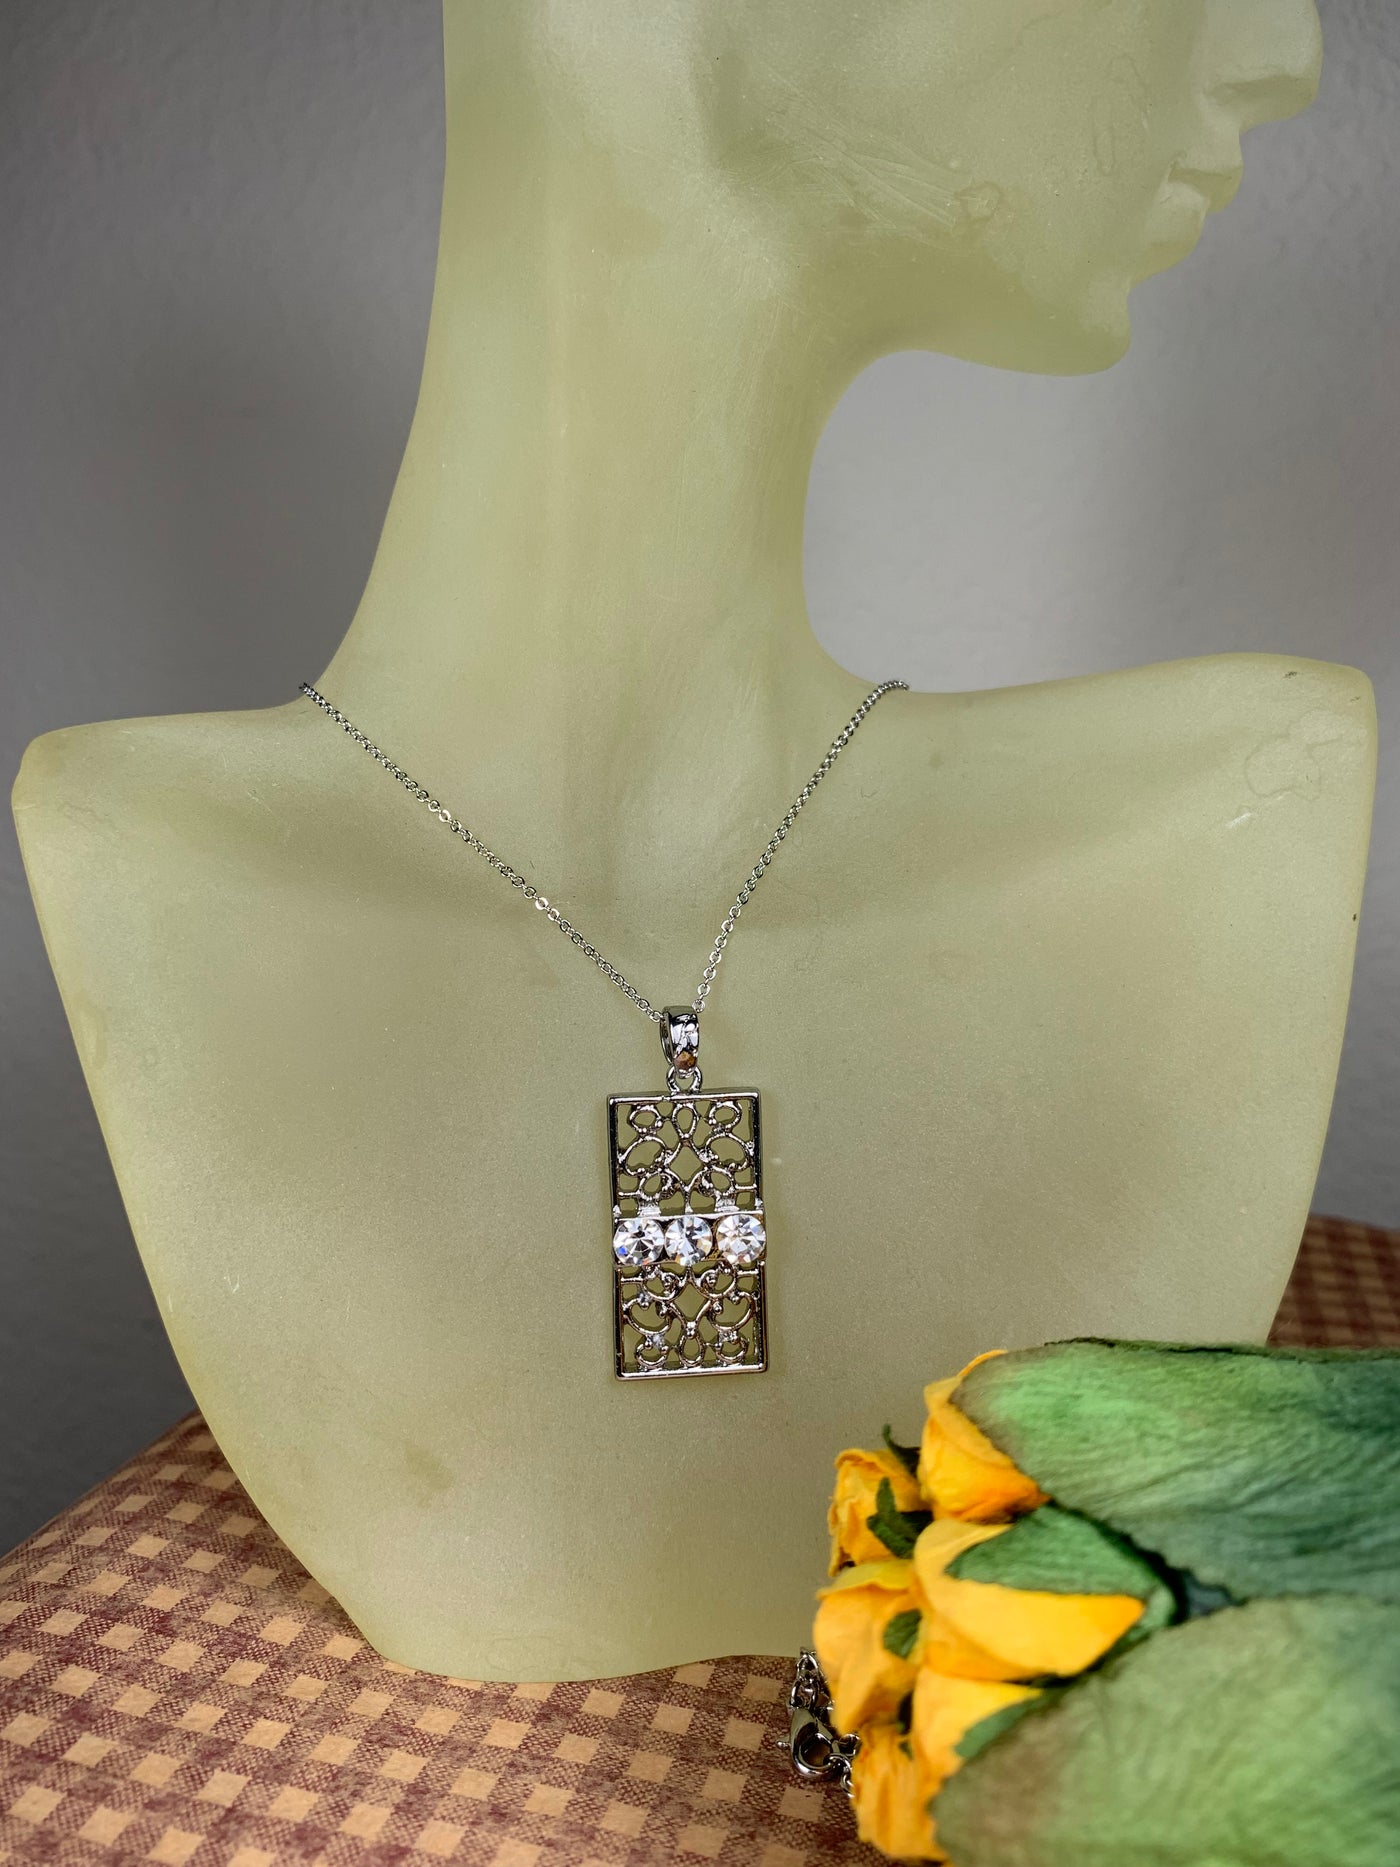 3 Brillian Crystal Rectangular Filigree Plate Necklace in Silver and Gold Tone